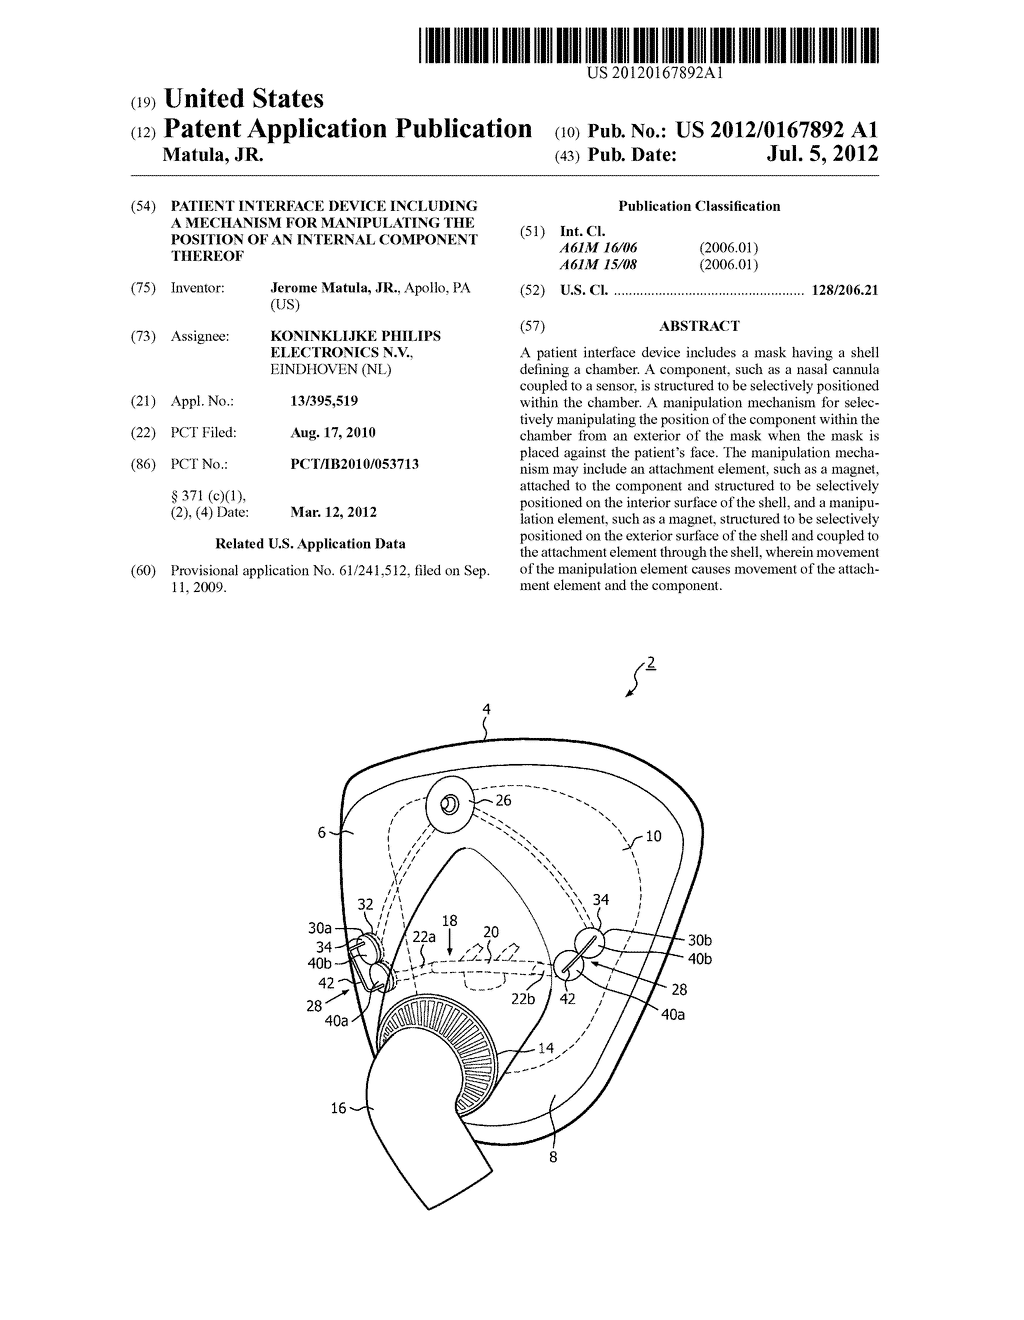 PATIENT INTERFACE DEVICE INCLUDING A MECHANISM FOR MANIPULATING THE     POSITION OF AN INTERNAL COMPONENT THEREOF - diagram, schematic, and image 01